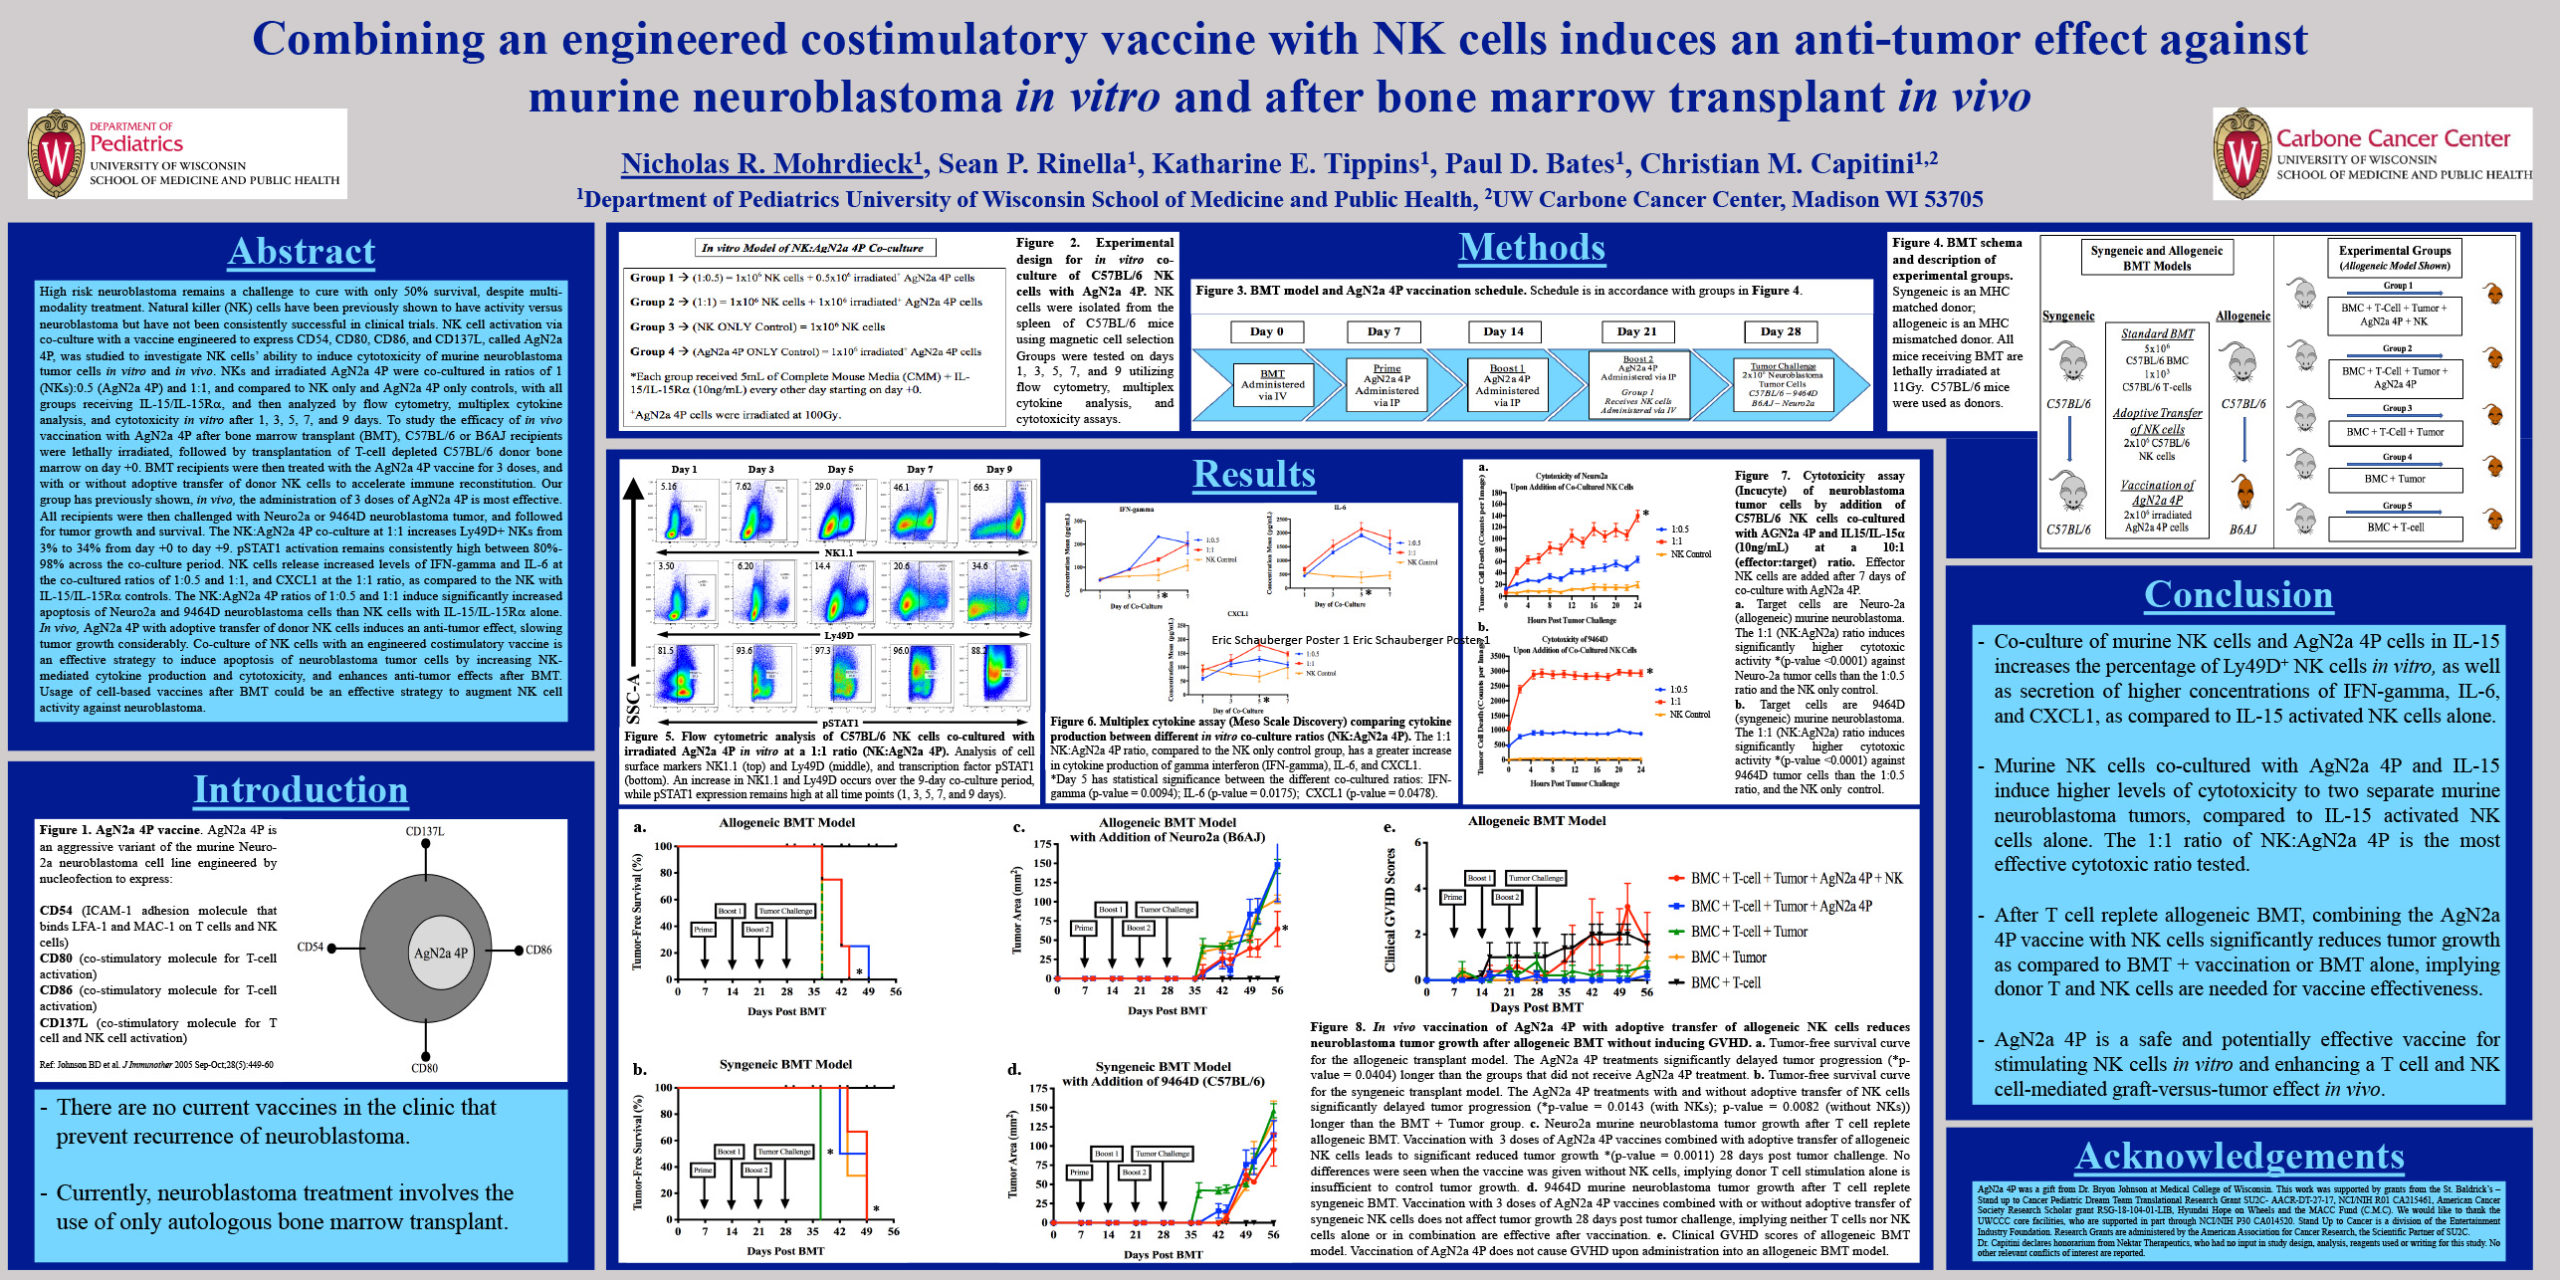 3.	Combining an engineered costimulatory vaccine with NK cells induces an anti-tumor effect against murine neuroblastoma in vitro and after bone marrow transplant in vivo poster image